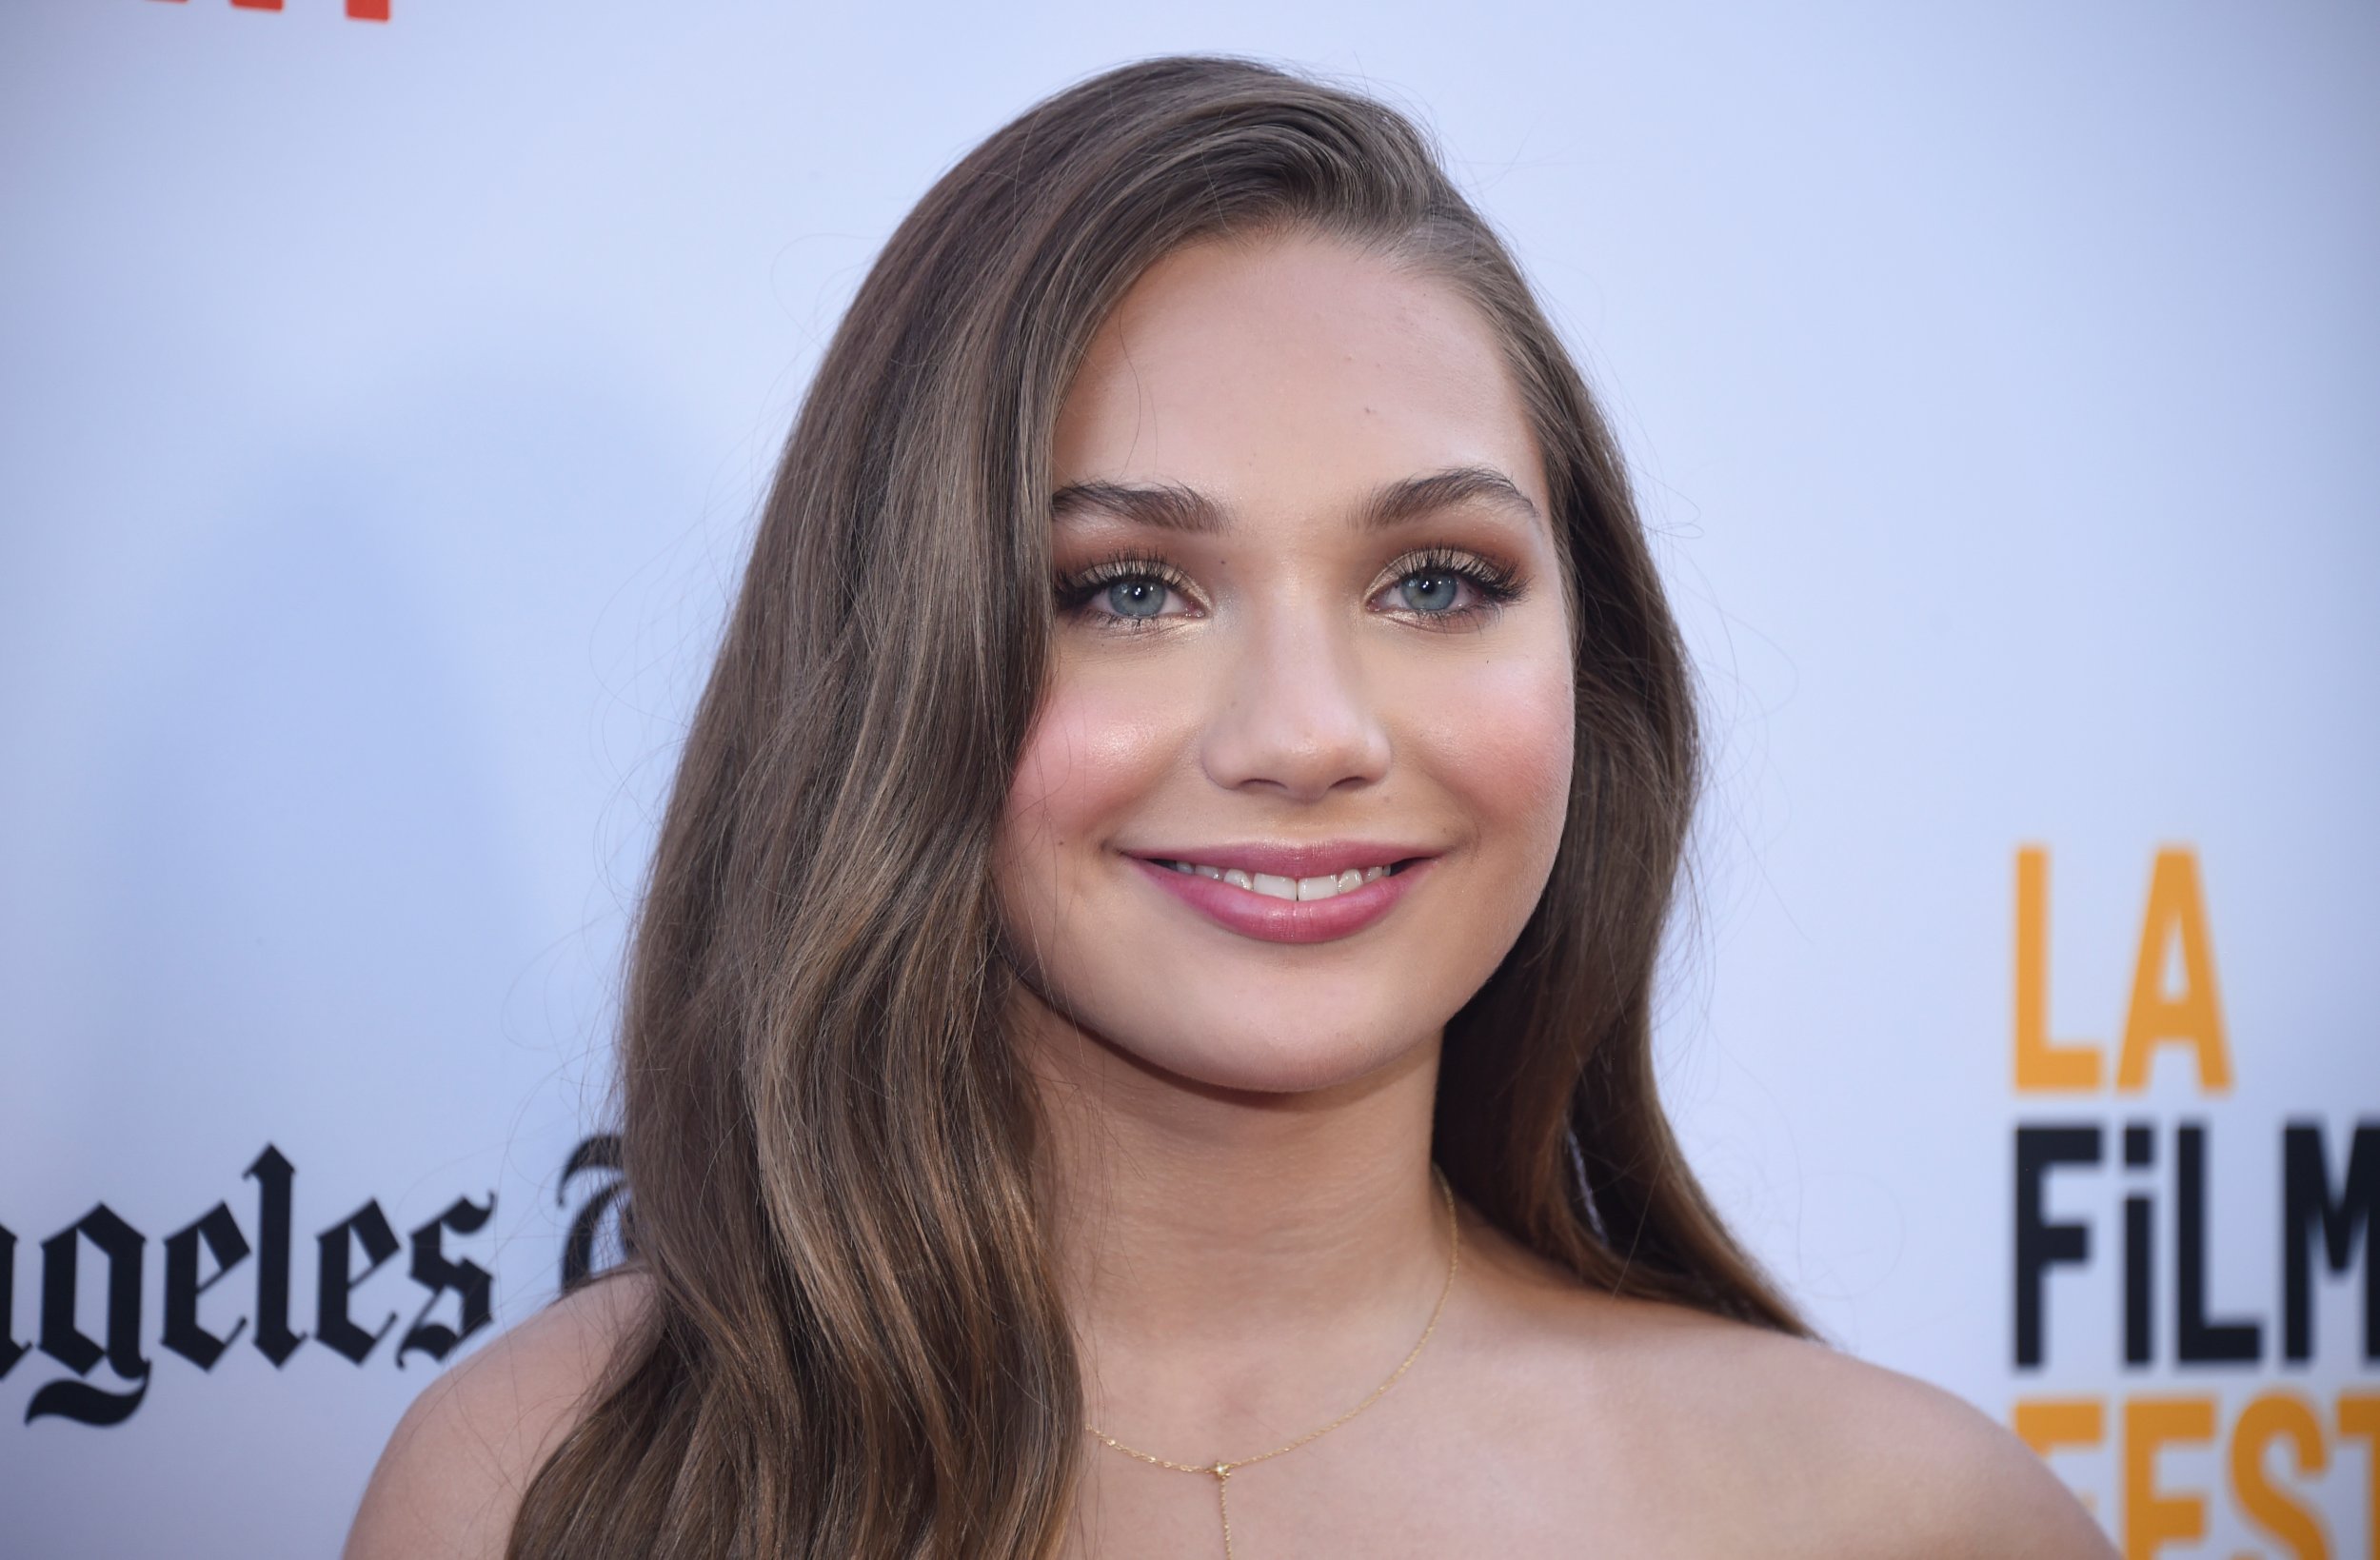 Where Is Maddie Ziegler Now? Her Career 2 Years After ‘Dance Moms